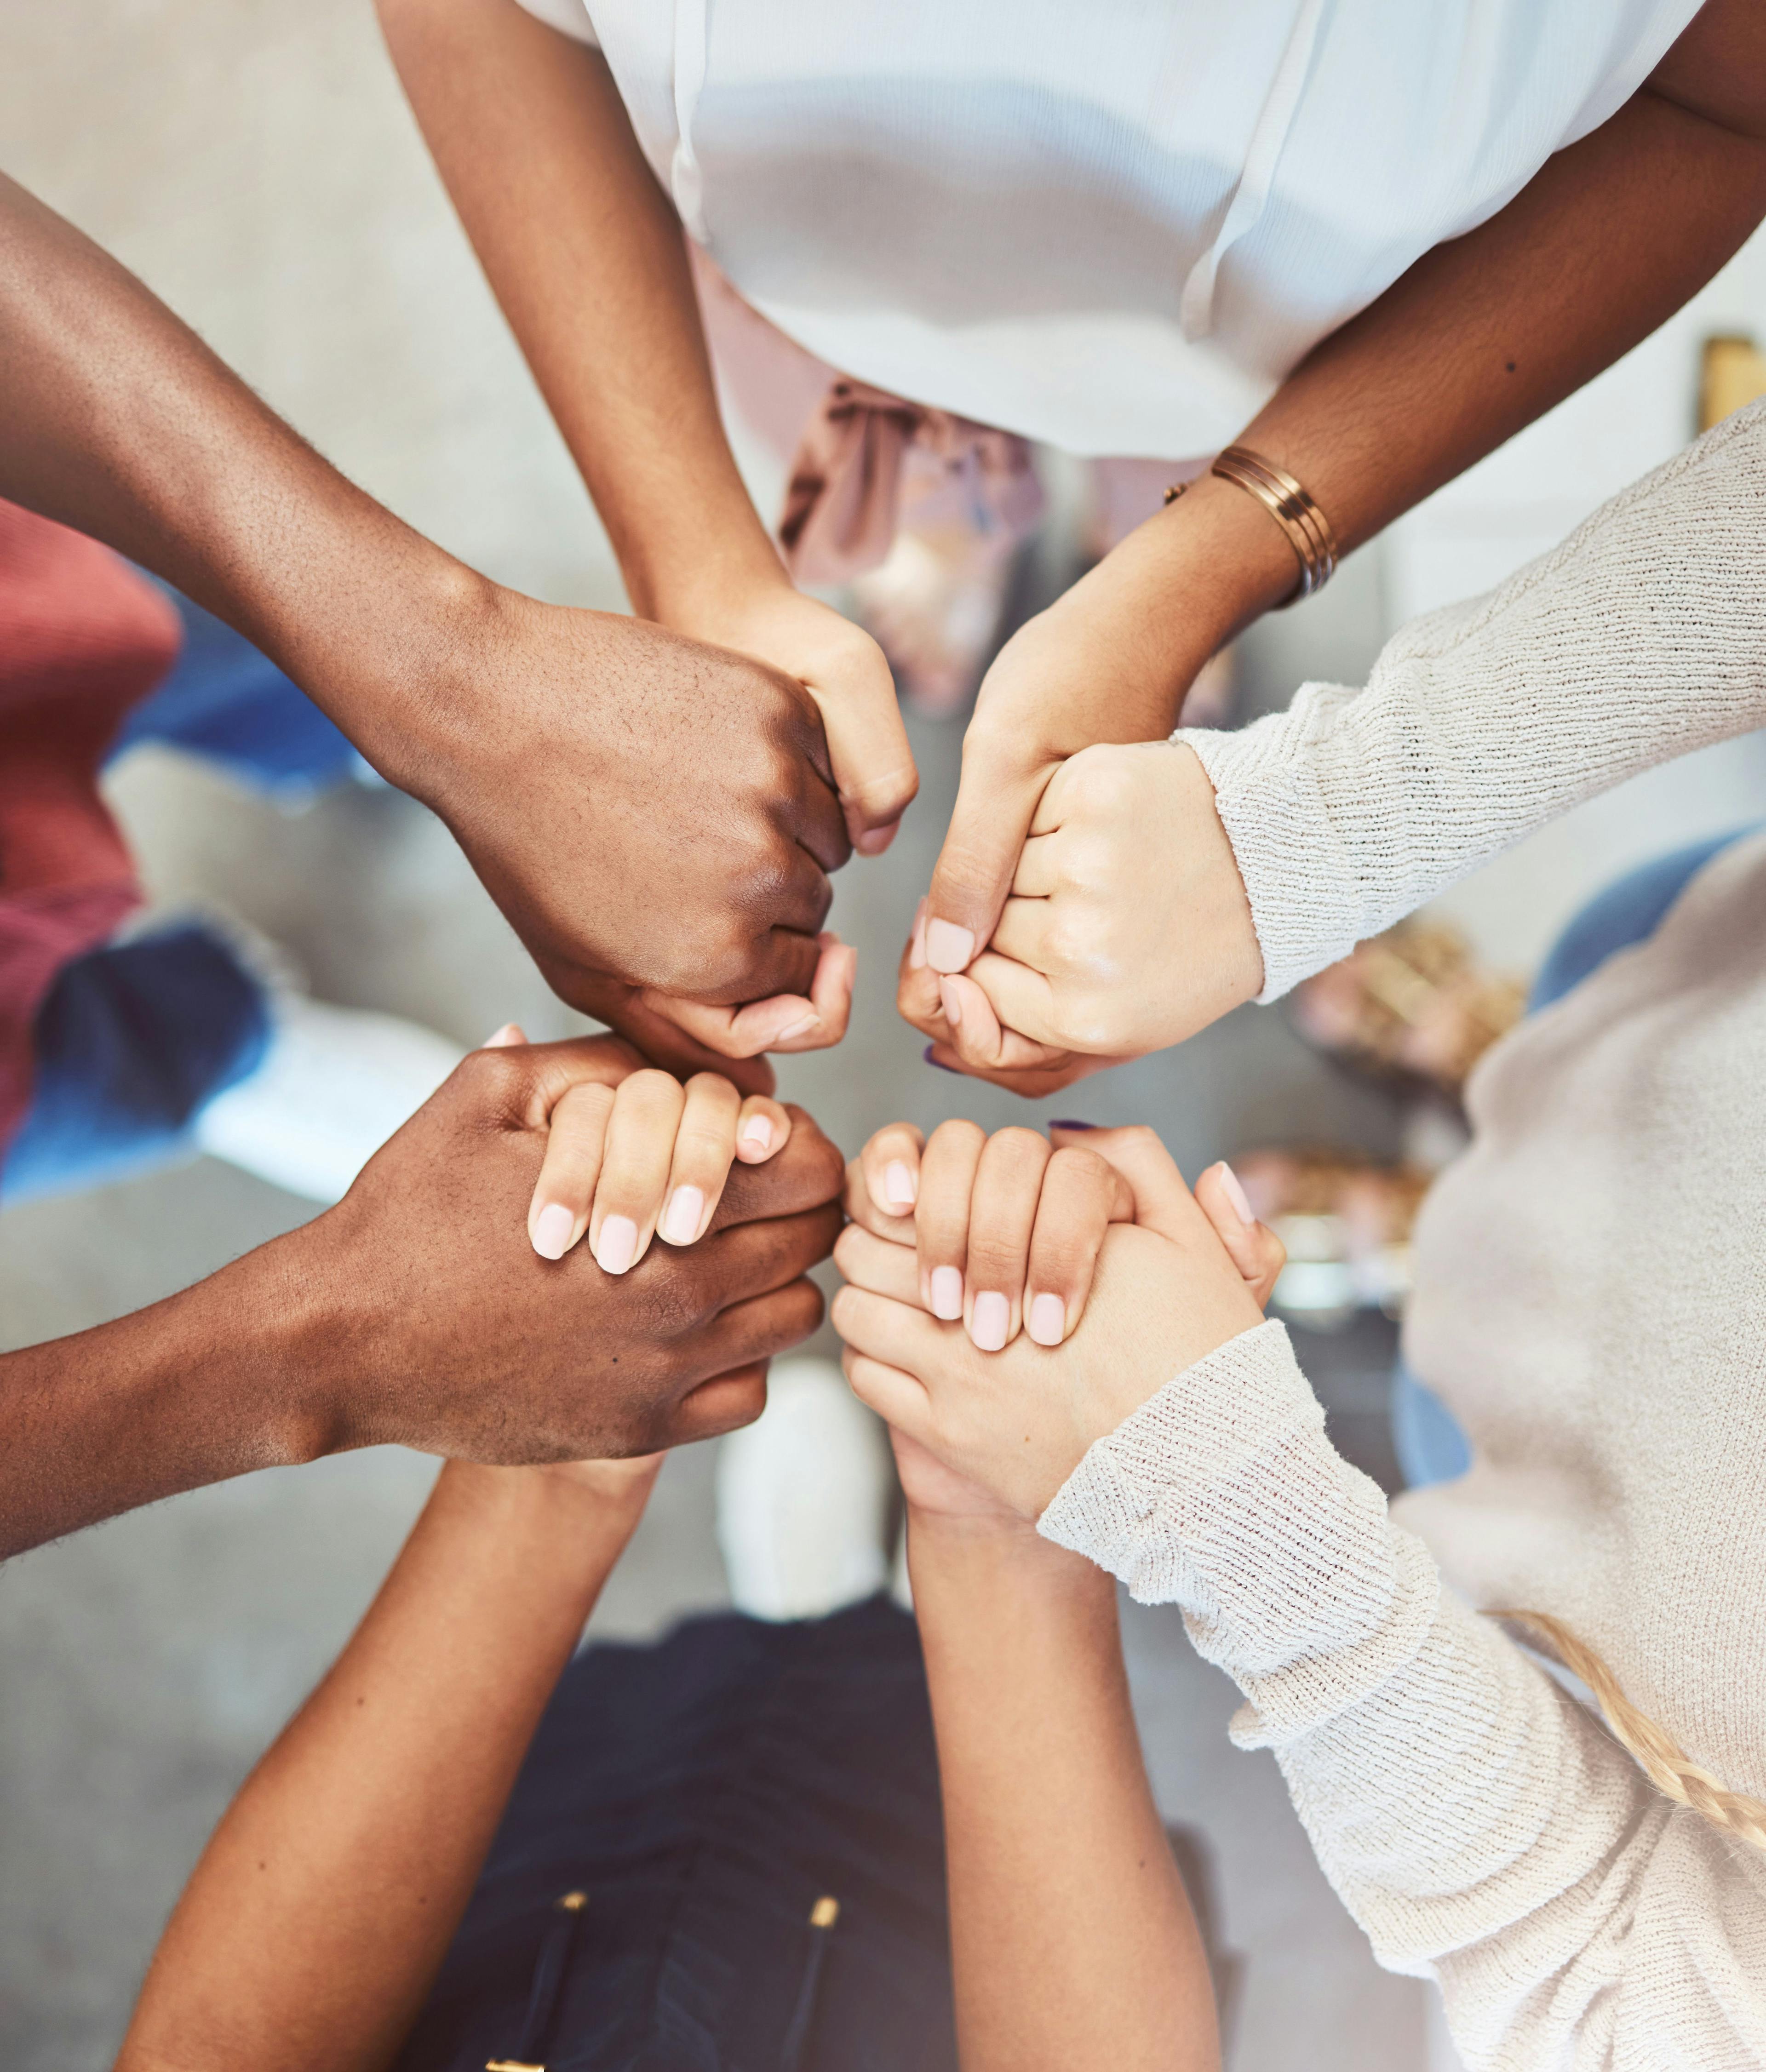 Support, prayer and trust with people holding hands in counseling for mental health, wellness or teamwork. Worship, hope and community group therapy for help, solidarity or spiritual faith from above- Image credit: Mumtaaz Dharsey/peopleimages.com | stock.adobe.com 